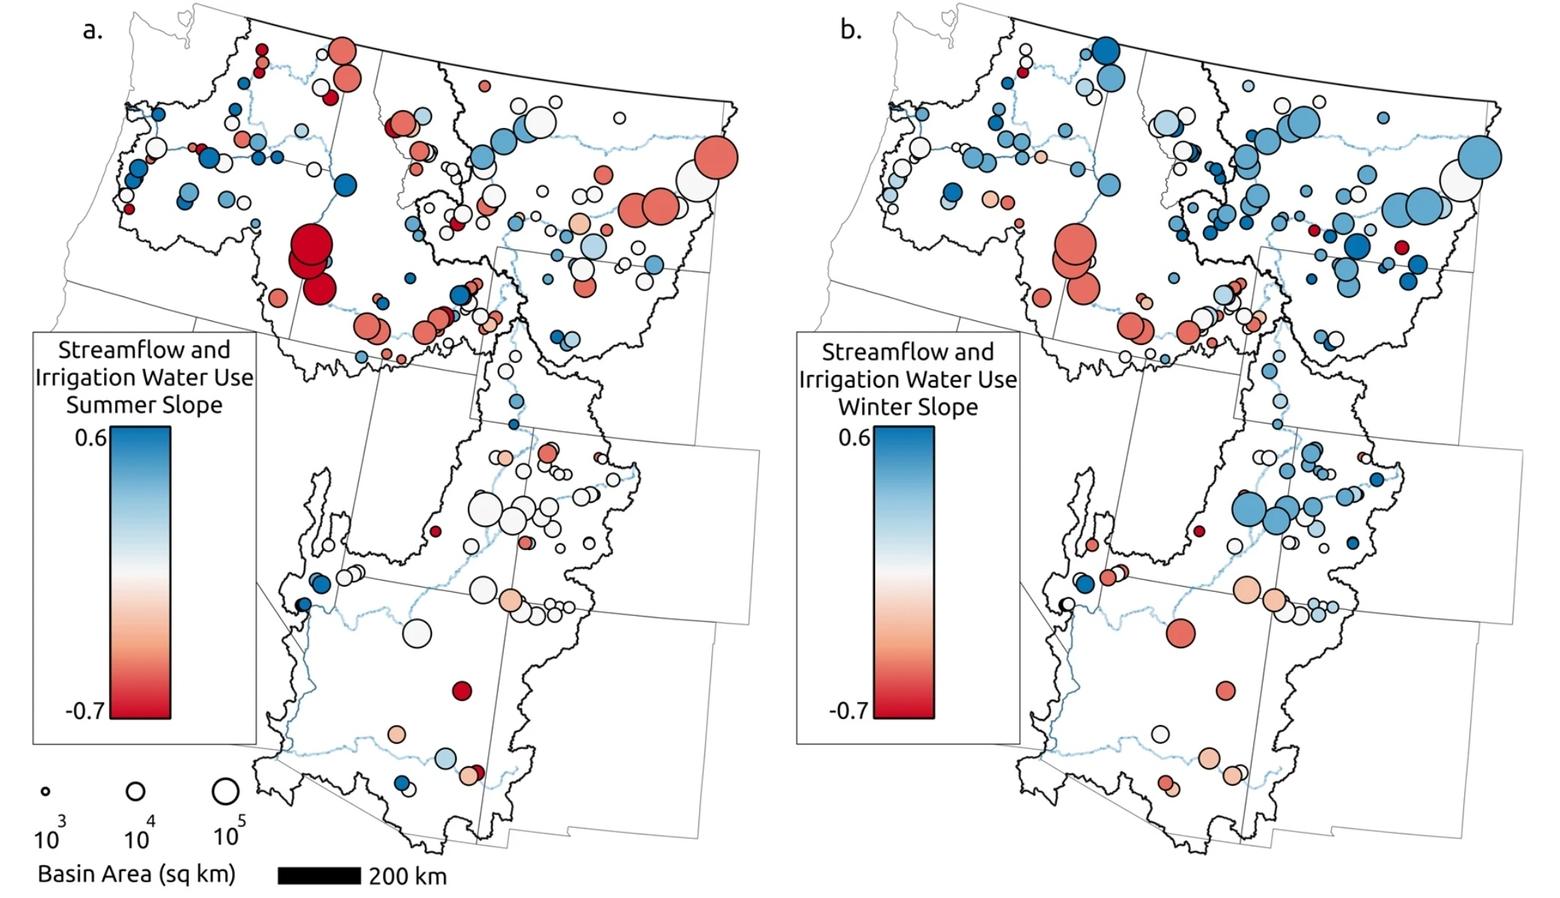 In this figure from the study, the relationship between irrigation use and streamflow is shown across the study area, after accounting for climate factors during the summer (a) and the winter (b). White dots signify no correlation, whereas red and blue dots show where a relationship between irrigation and streamflow was documented. Red indicates areas where increased irrigation water use lowered streamflow, and blue indicates where increased irrigation increased streamflow. 